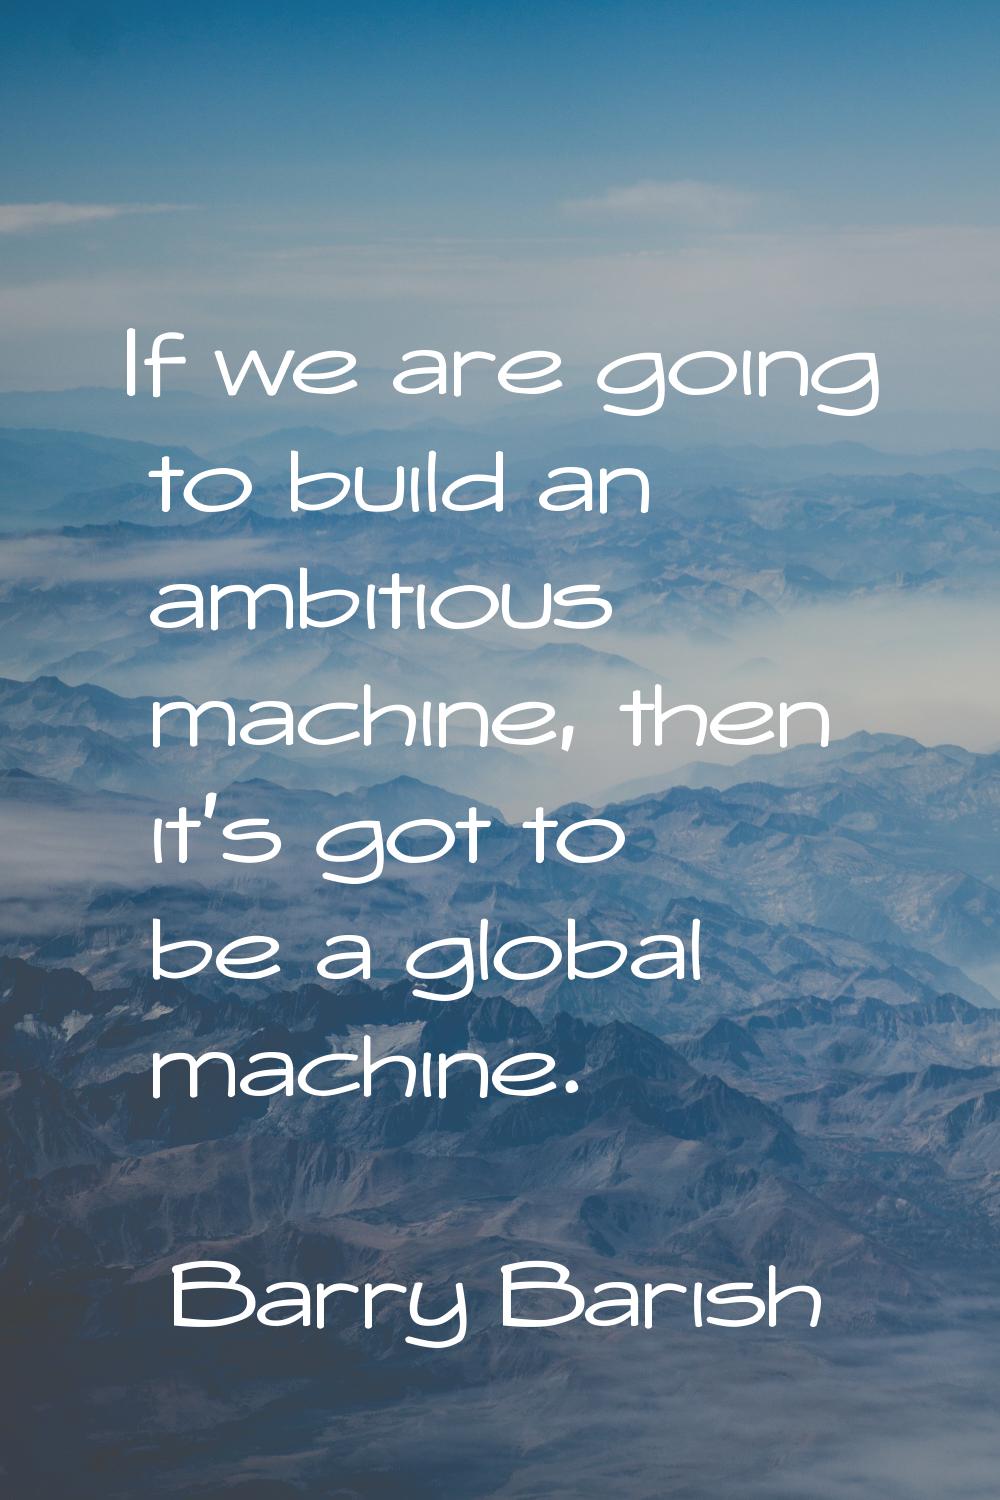 If we are going to build an ambitious machine, then it's got to be a global machine.